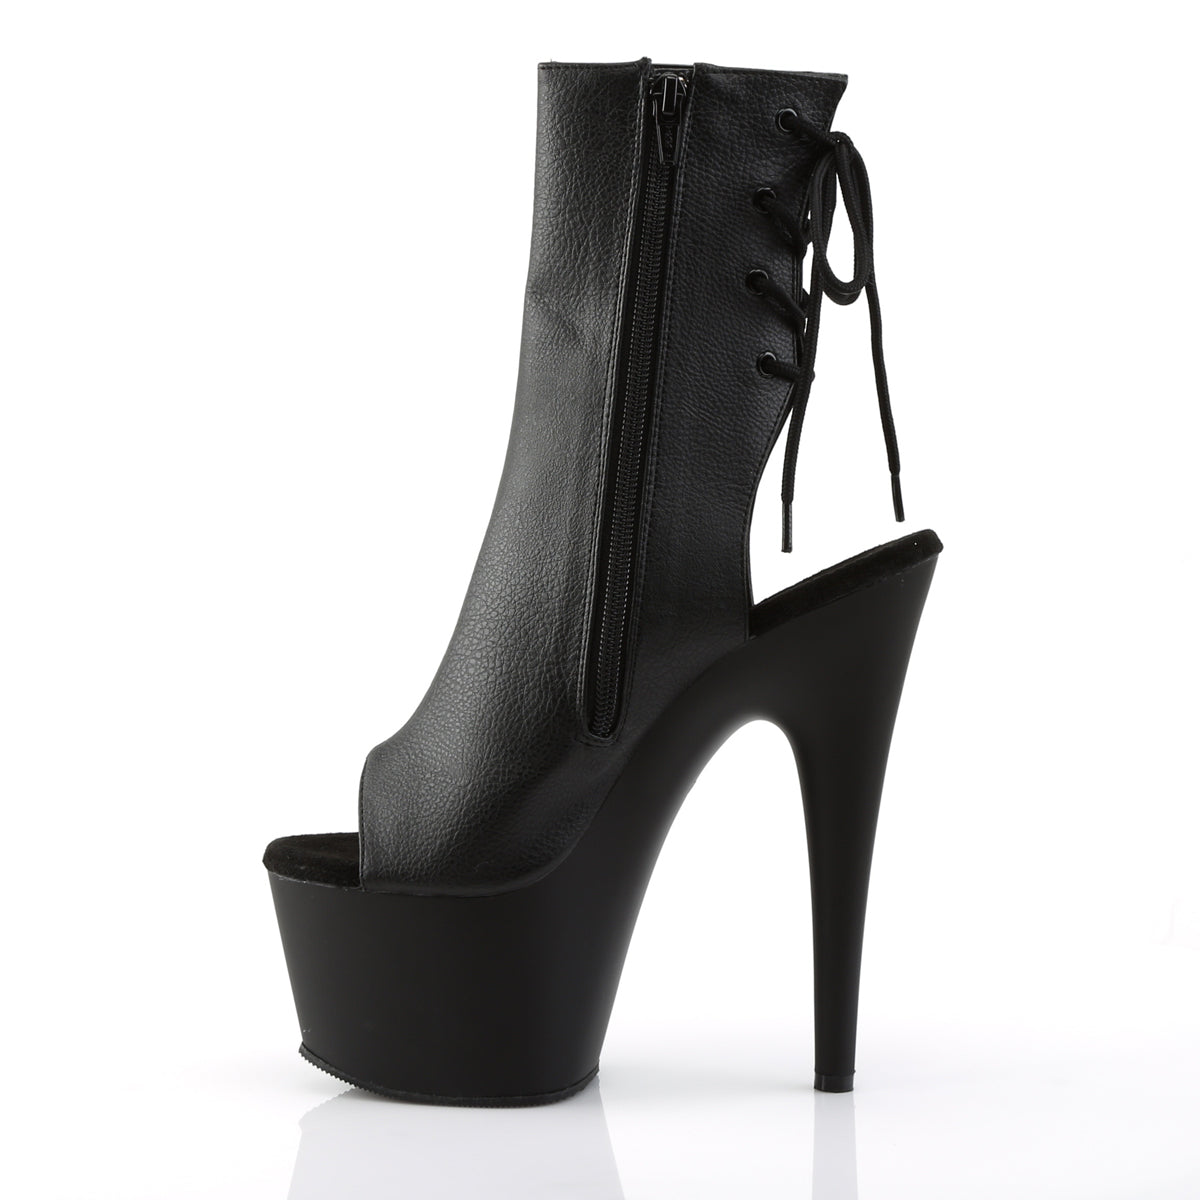 ADORE-1018 - Black Faux Leather Boots